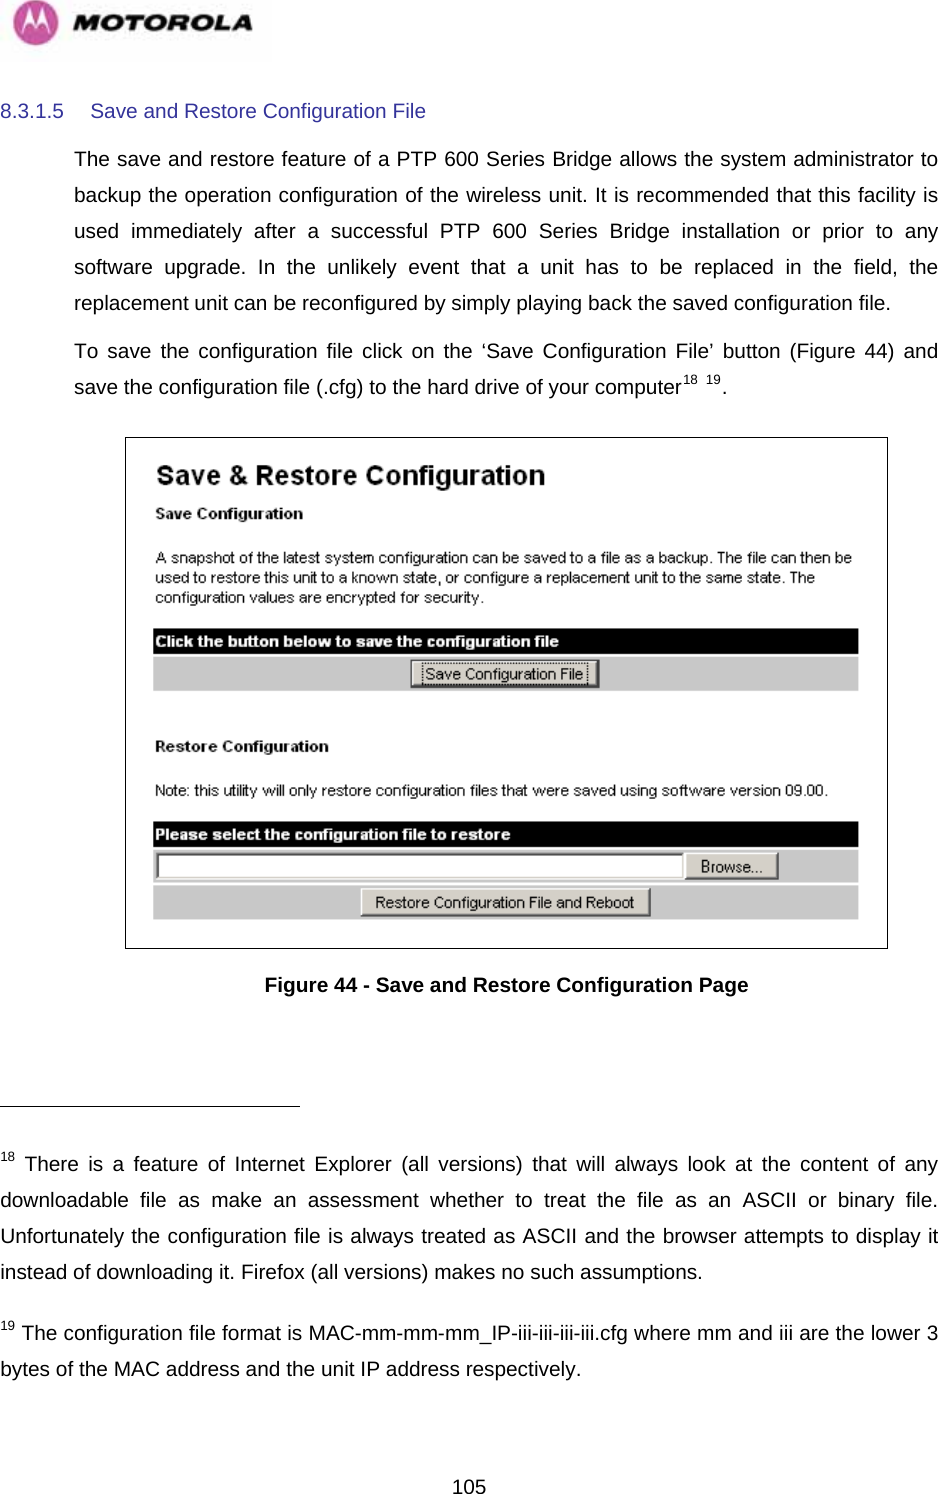   1058.3.1.5  Save and Restore Configuration File The save and restore feature of a PTP 600 Series Bridge allows the system administrator to backup the operation configuration of the wireless unit. It is recommended that this facility is used immediately after a successful PTP 600 Series Bridge installation or prior to any software upgrade. In the unlikely event that a unit has to be replaced in the field, the replacement unit can be reconfigured by simply playing back the saved configuration file. To save the configuration file click on the ‘Save Configuration File’ button (Figure 44) and save the configuration file (.cfg) to the hard drive of your computer18 19.   Figure 44 - Save and Restore Configuration Page                                                       18 There is a feature of Internet Explorer (all versions) that will always look at the content of any downloadable file as make an assessment whether to treat the file as an ASCII or binary file. Unfortunately the configuration file is always treated as ASCII and the browser attempts to display it instead of downloading it. Firefox (all versions) makes no such assumptions. 19 The configuration file format is MAC-mm-mm-mm_IP-iii-iii-iii-iii.cfg where mm and iii are the lower 3 bytes of the MAC address and the unit IP address respectively. 